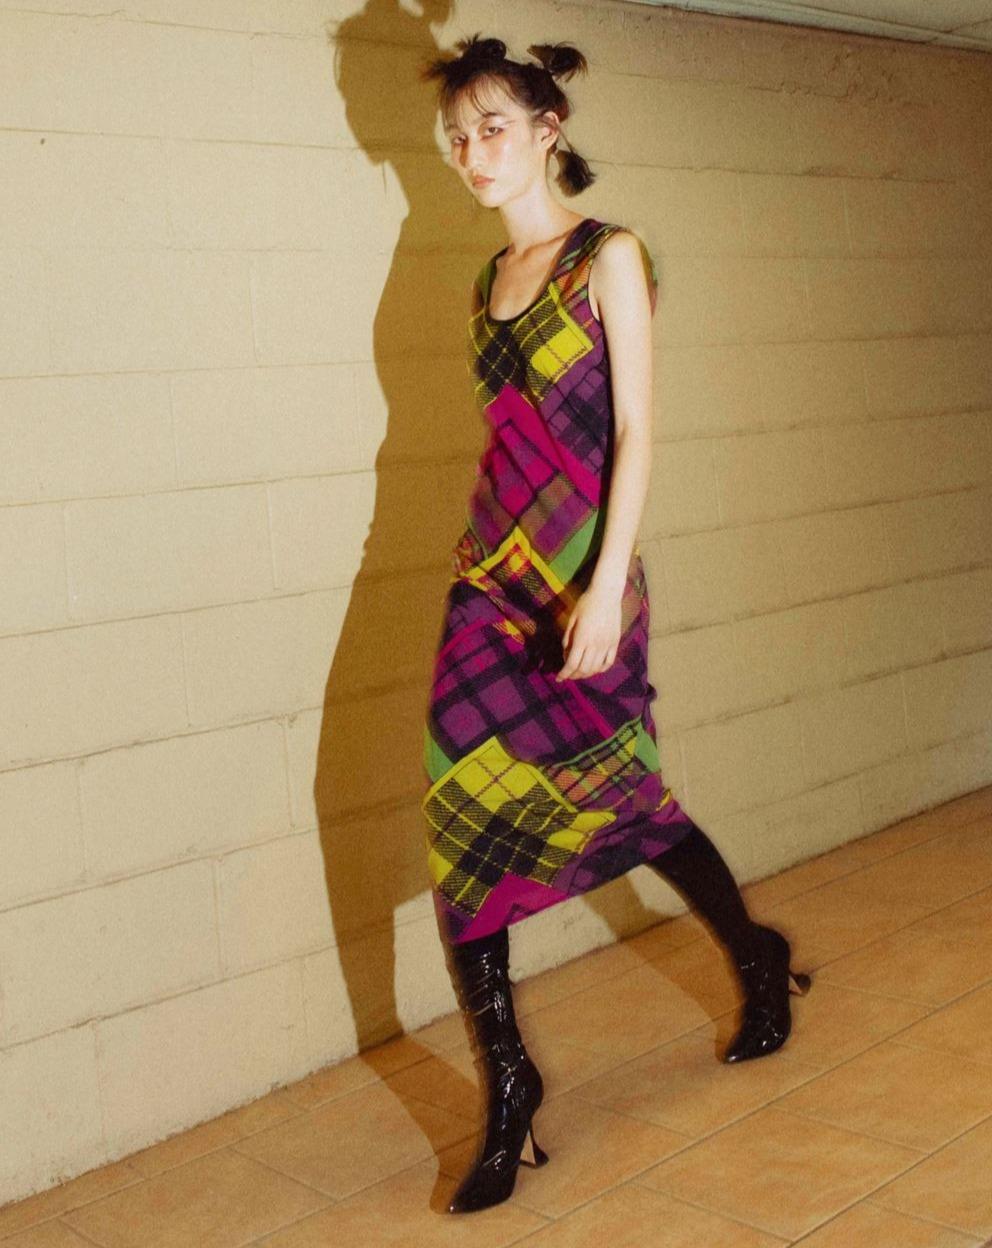 Versace scoop neck sleeveless midi dress. Plaid print in dark purples, yellow and green hues. Back zip enclosure. Fabric feels like light silk and nylon. In very good vintage condition, with very minor spot on back; pin sized holes in back (not